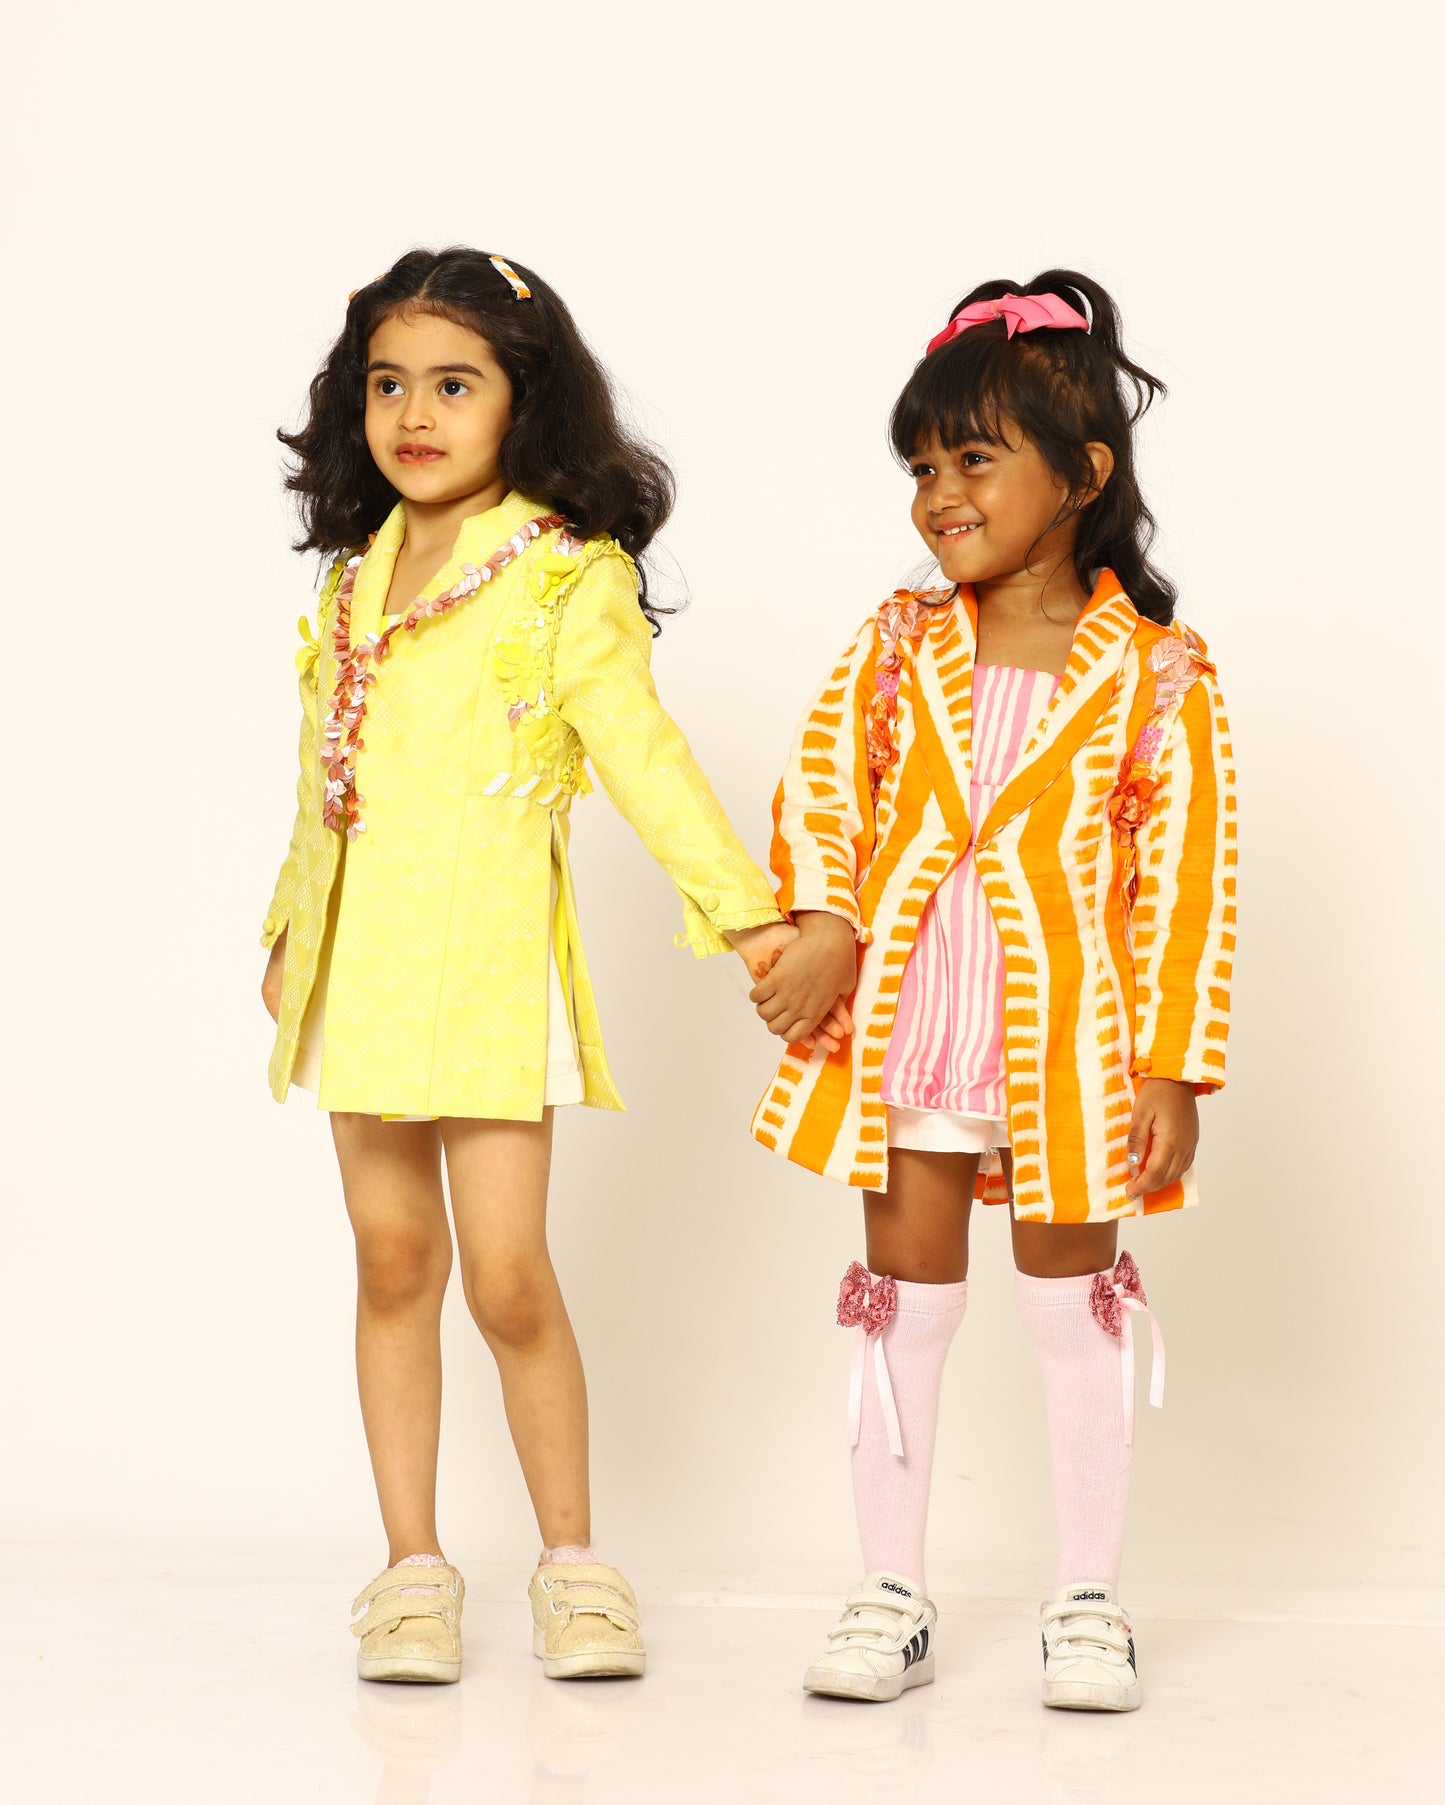 lemon + summer + yellow + blazer + shoes + clips + soft + bossy + flowers + leaves + cheerful + top + shorts + striped + sister + friend + orange + pink + bow + front